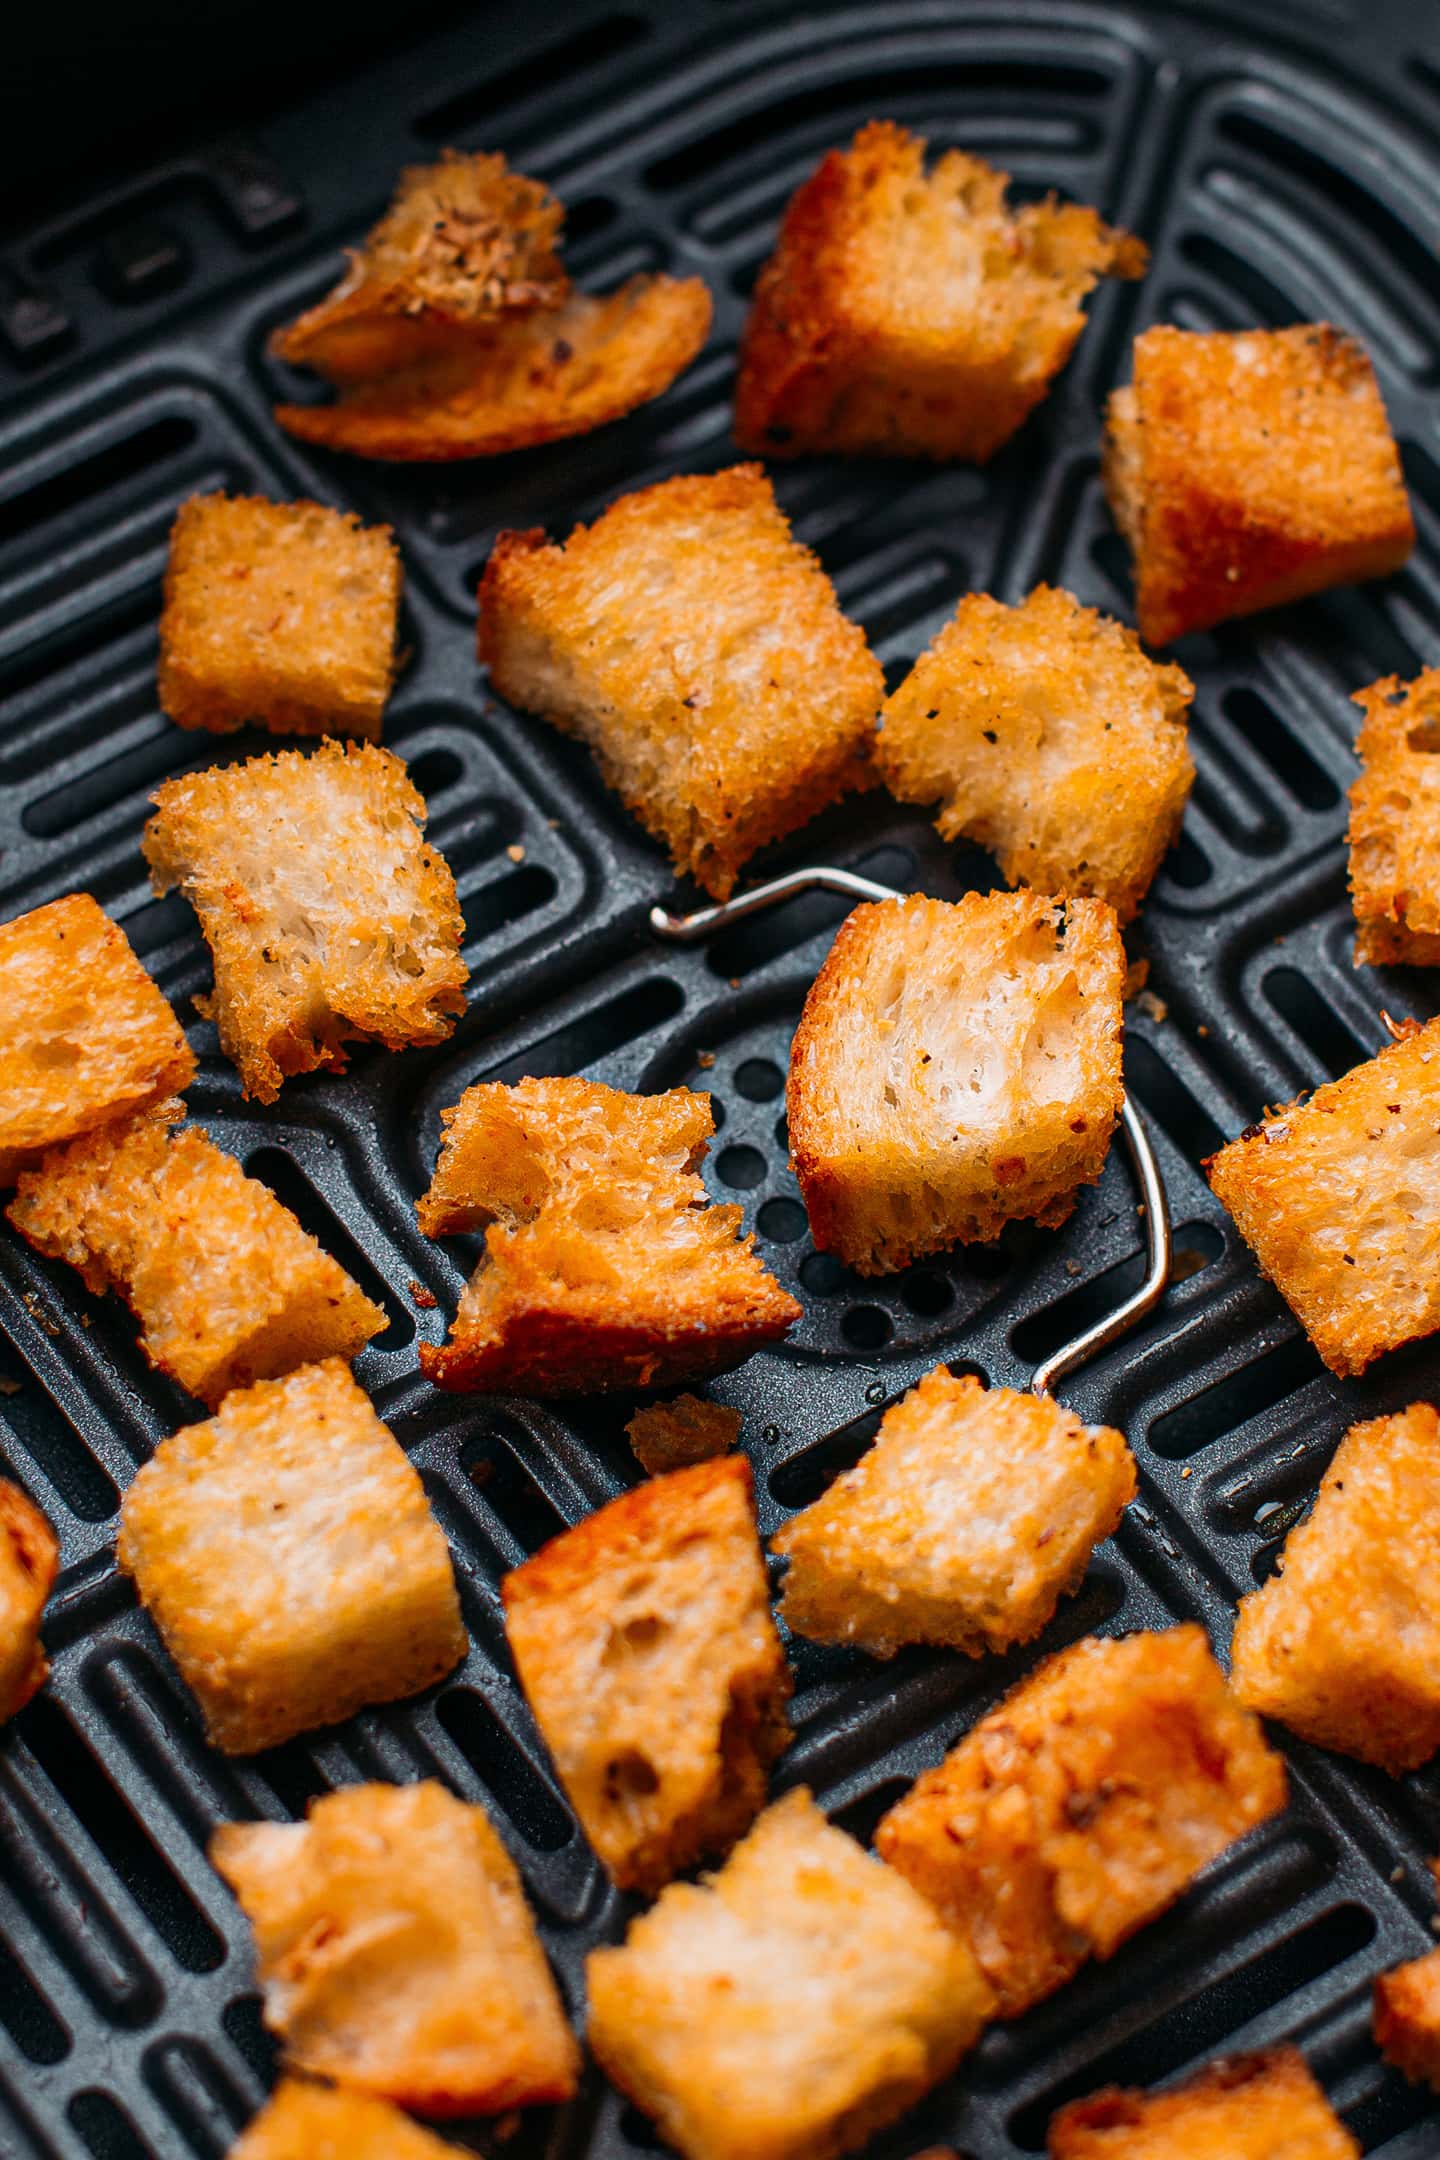 Croutons in an air fryer.